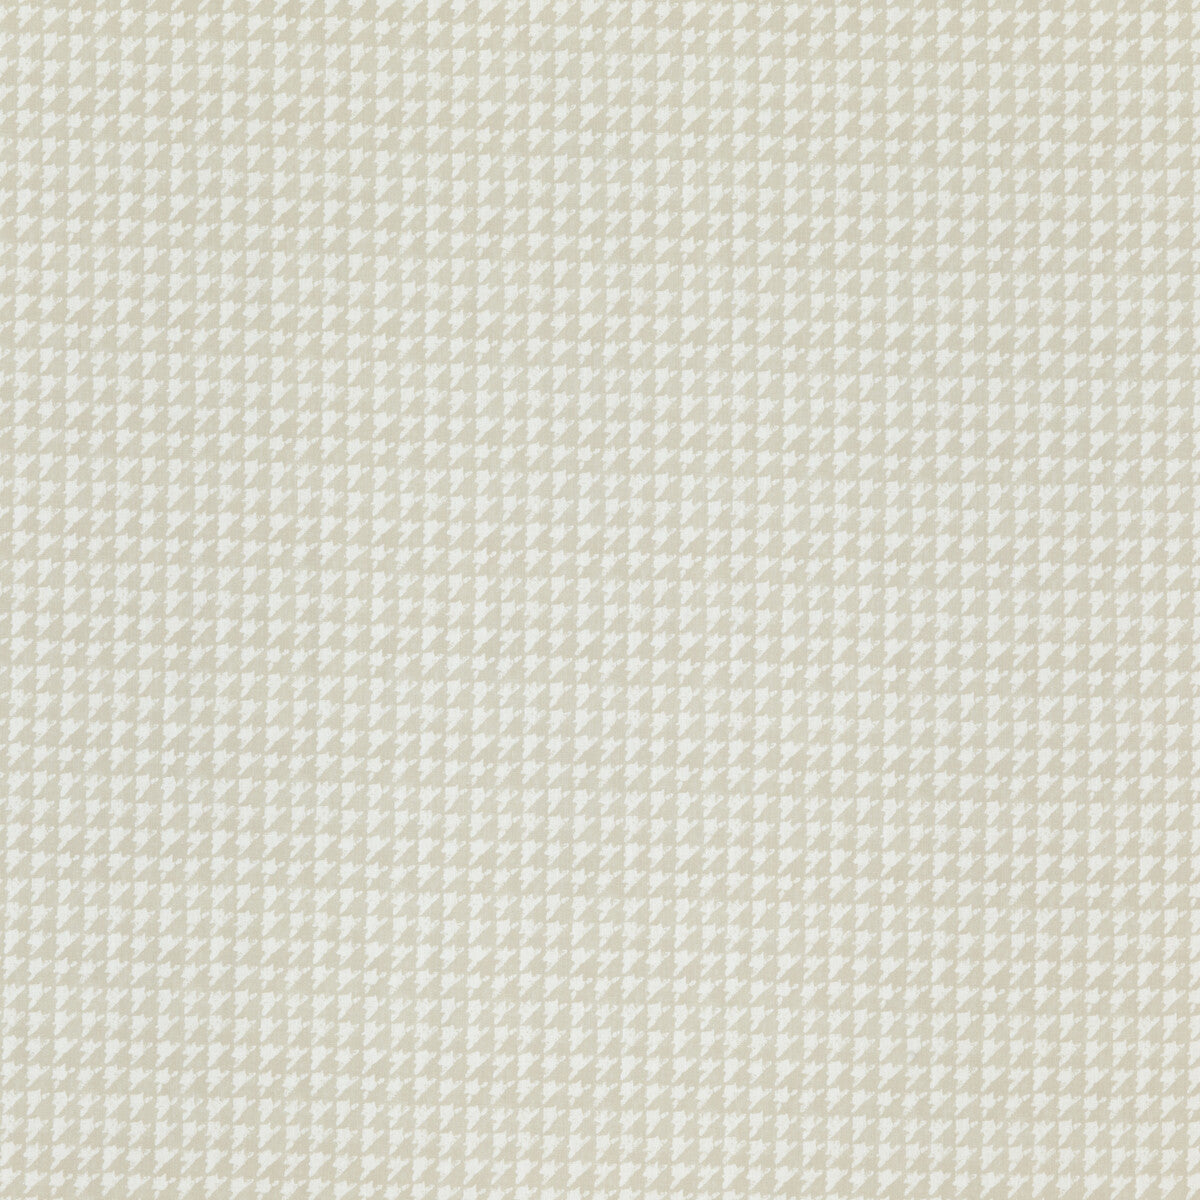 Arlo fabric in linen color - pattern ED75032.3.0 - by Threads in the Moro collection